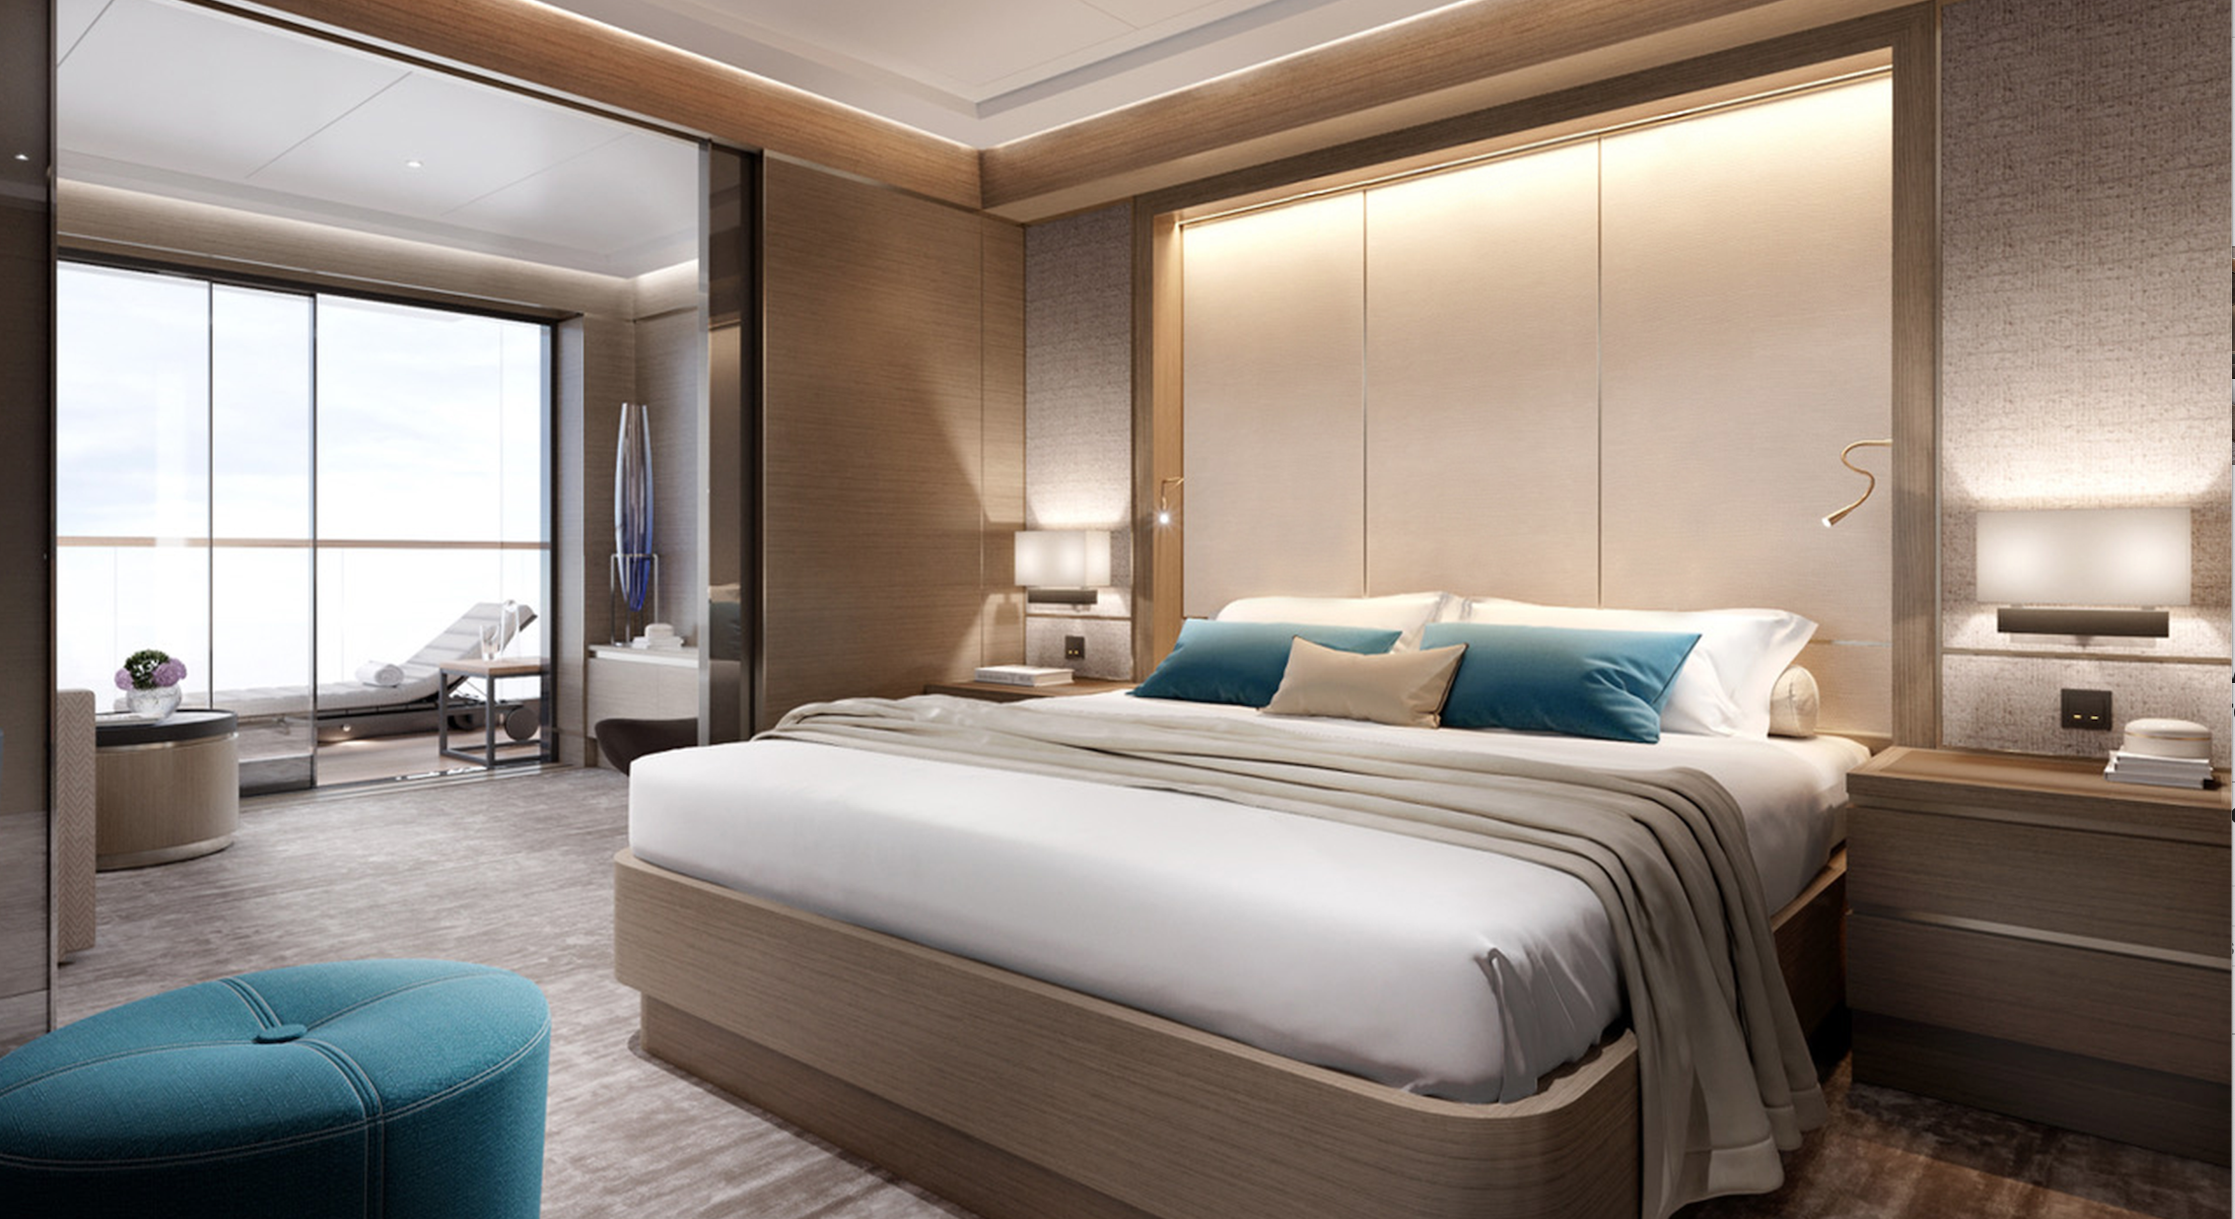   Rendering of a Signature Suite bedroom (photo credit: Ritz-Carlton Yacht Collection)  